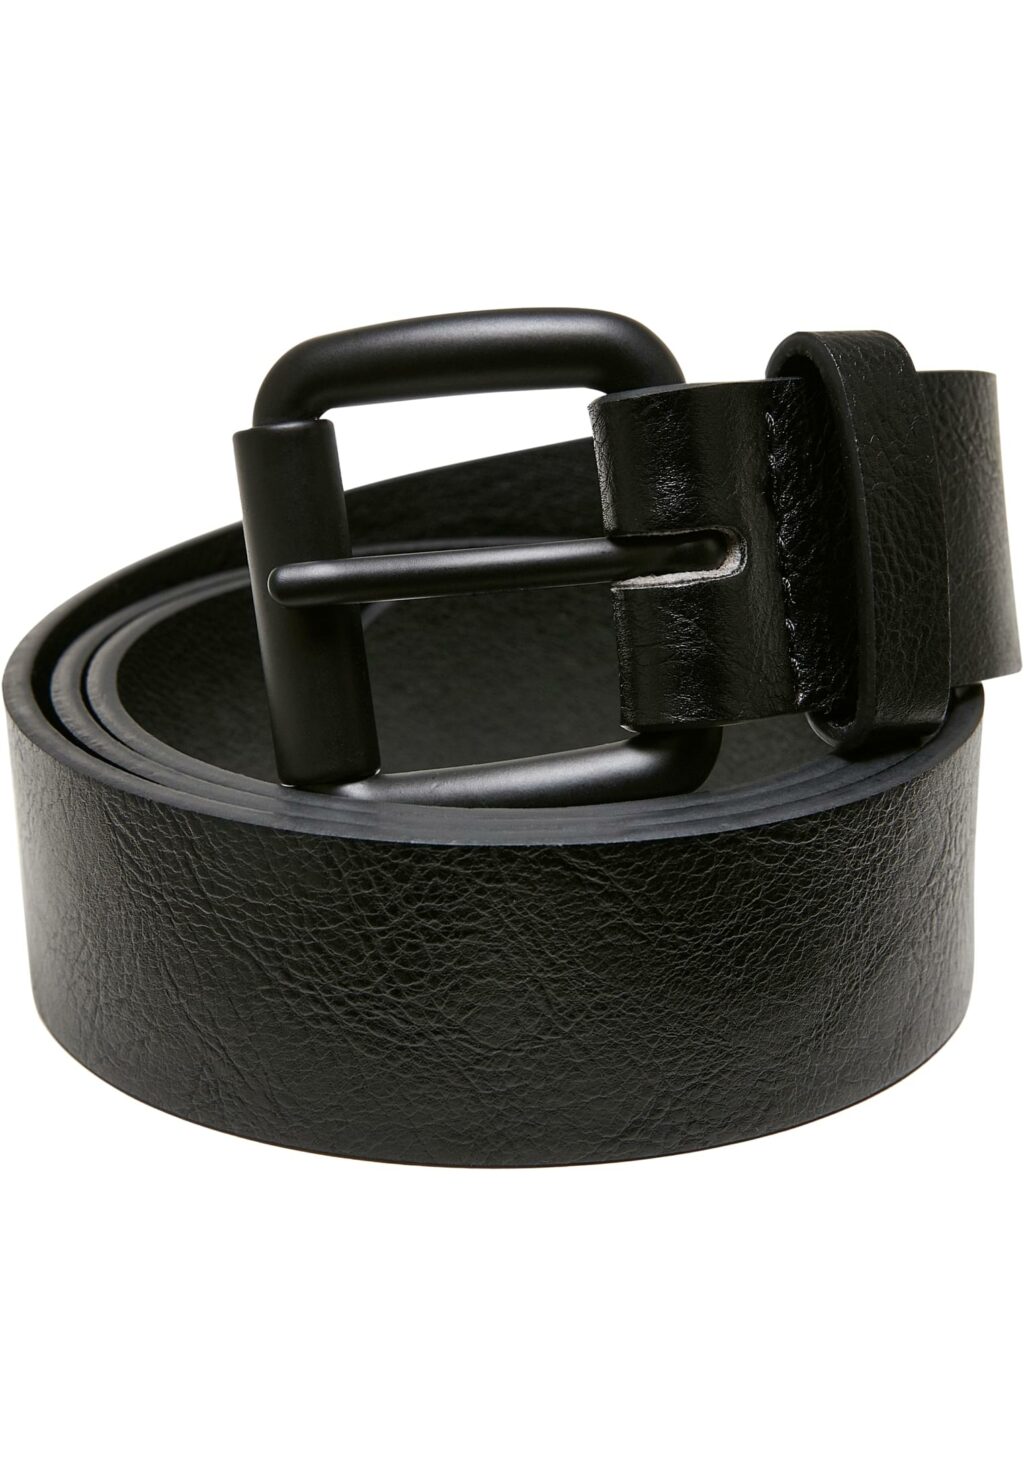 Synthetic Leather Thorn Buckle Casual Belt black TB5661